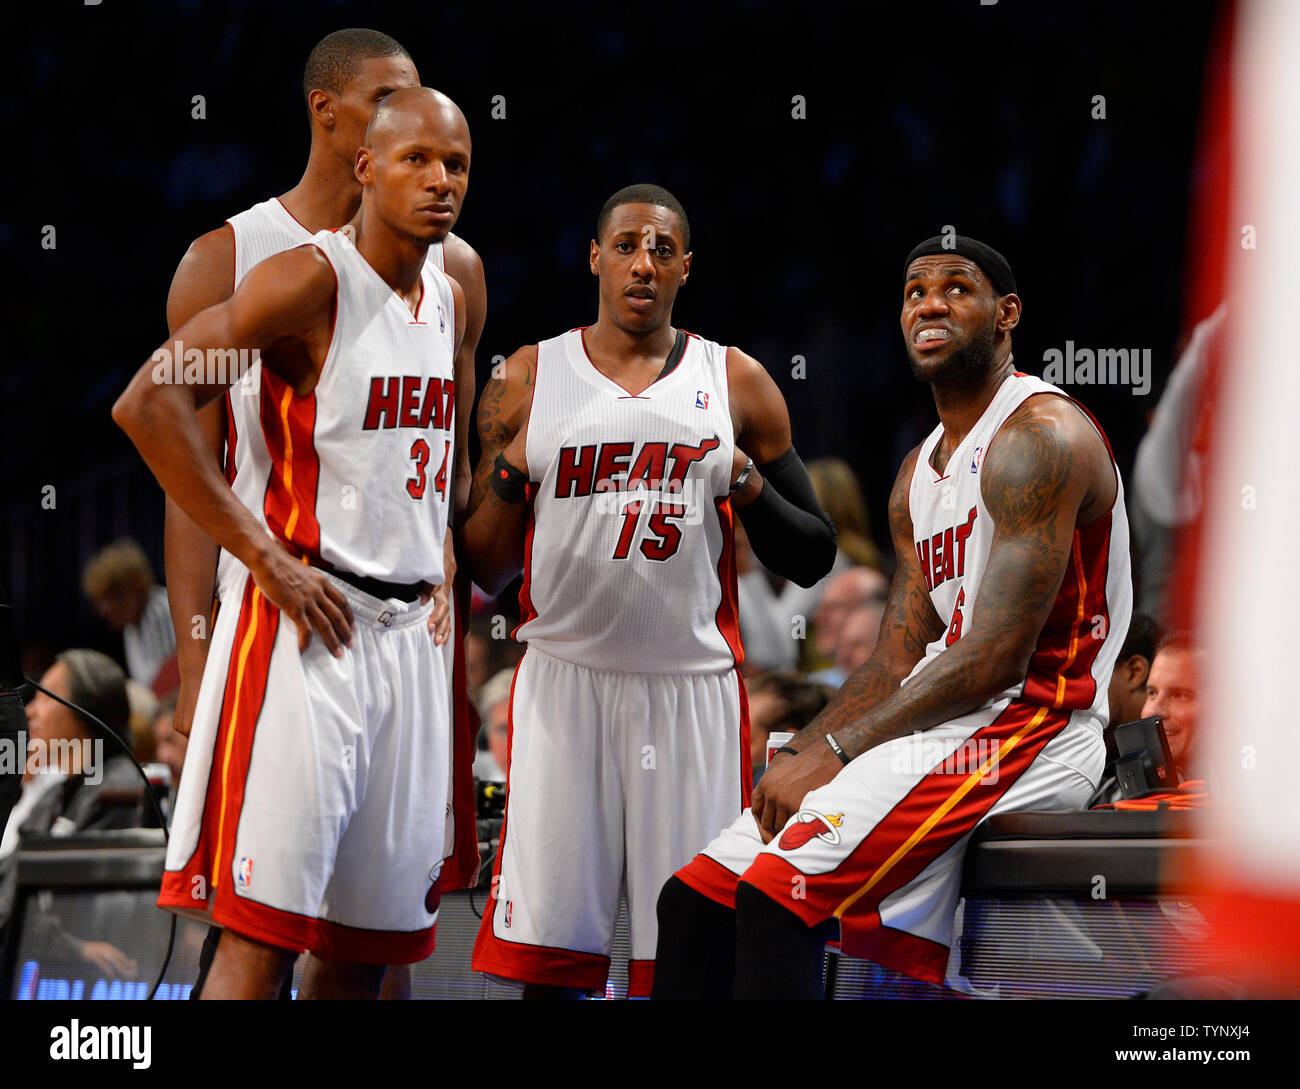 Miami Heat shooting guard Ray Allen (34), Heat point guard Mario Chalmers (15) and Heat small forward LeBron James (6) look on during a timeout in the fourth quarter against the Brooklyn Nets at Barclays Center in New York City on November 1, 2013.   UPI/Rich Kane Stock Photo